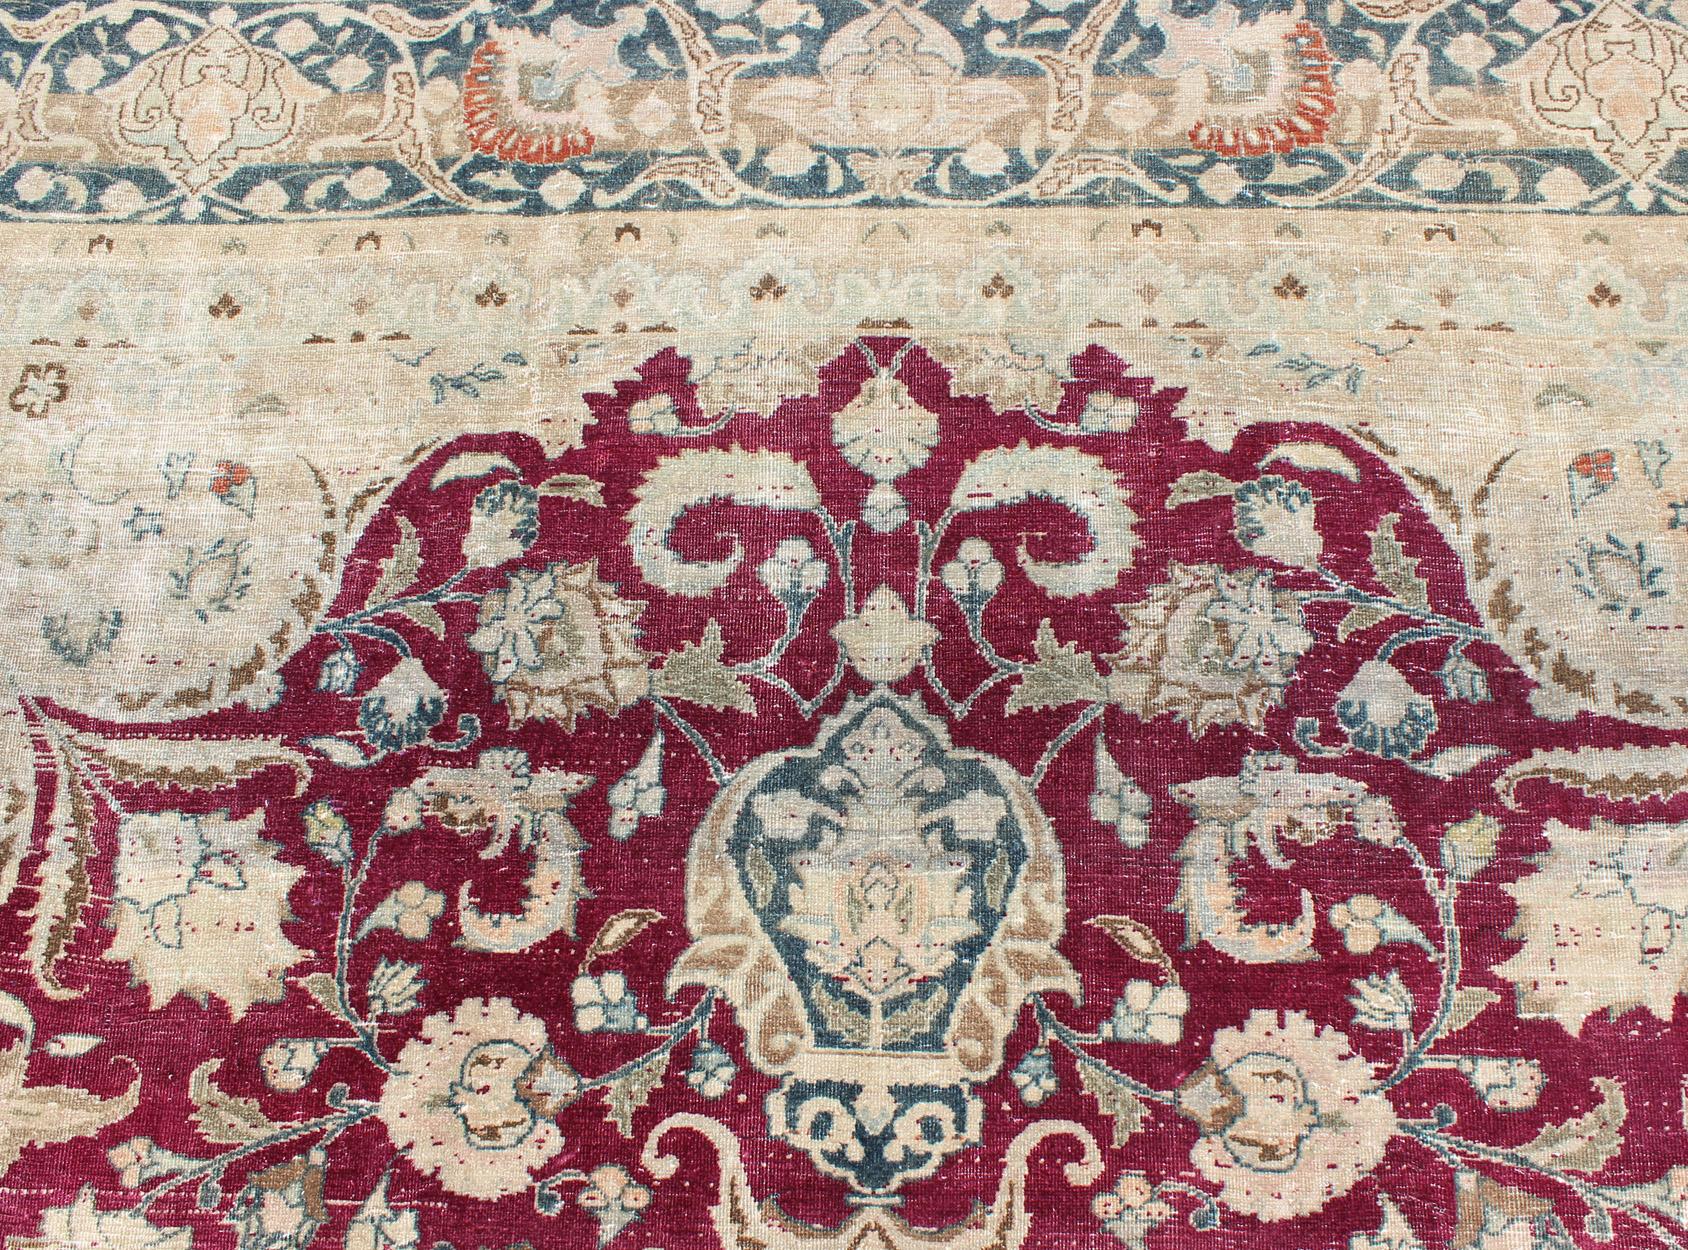 Layered Floral Medallion Antique Persian Mashad Rug in Red, Steel Blue and Cream In Excellent Condition For Sale In Atlanta, GA